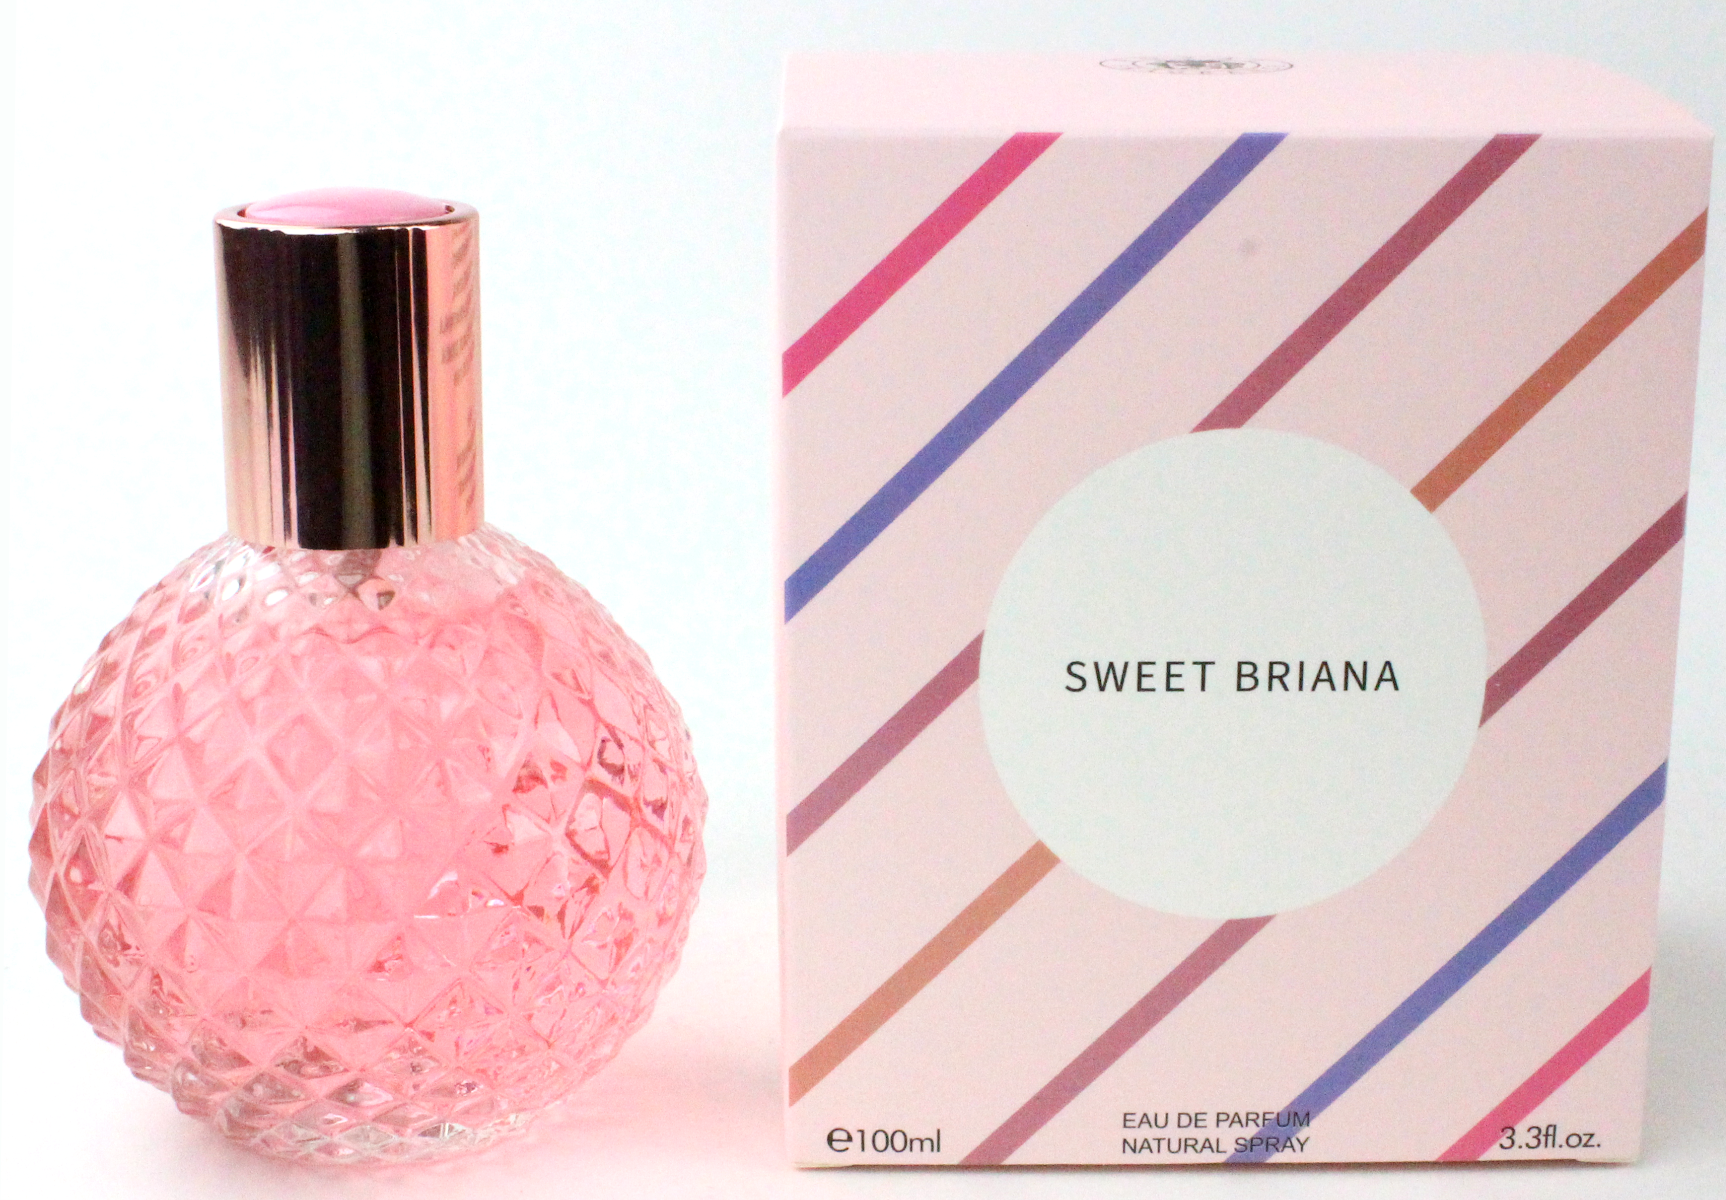 Featuring a light and alluring scent with hints of lemon, blackcurrant, and vanilla, our "LA" Ladies Sweet Briana Fragrance is perfect for a delicate smell to accompany a darling outfit.